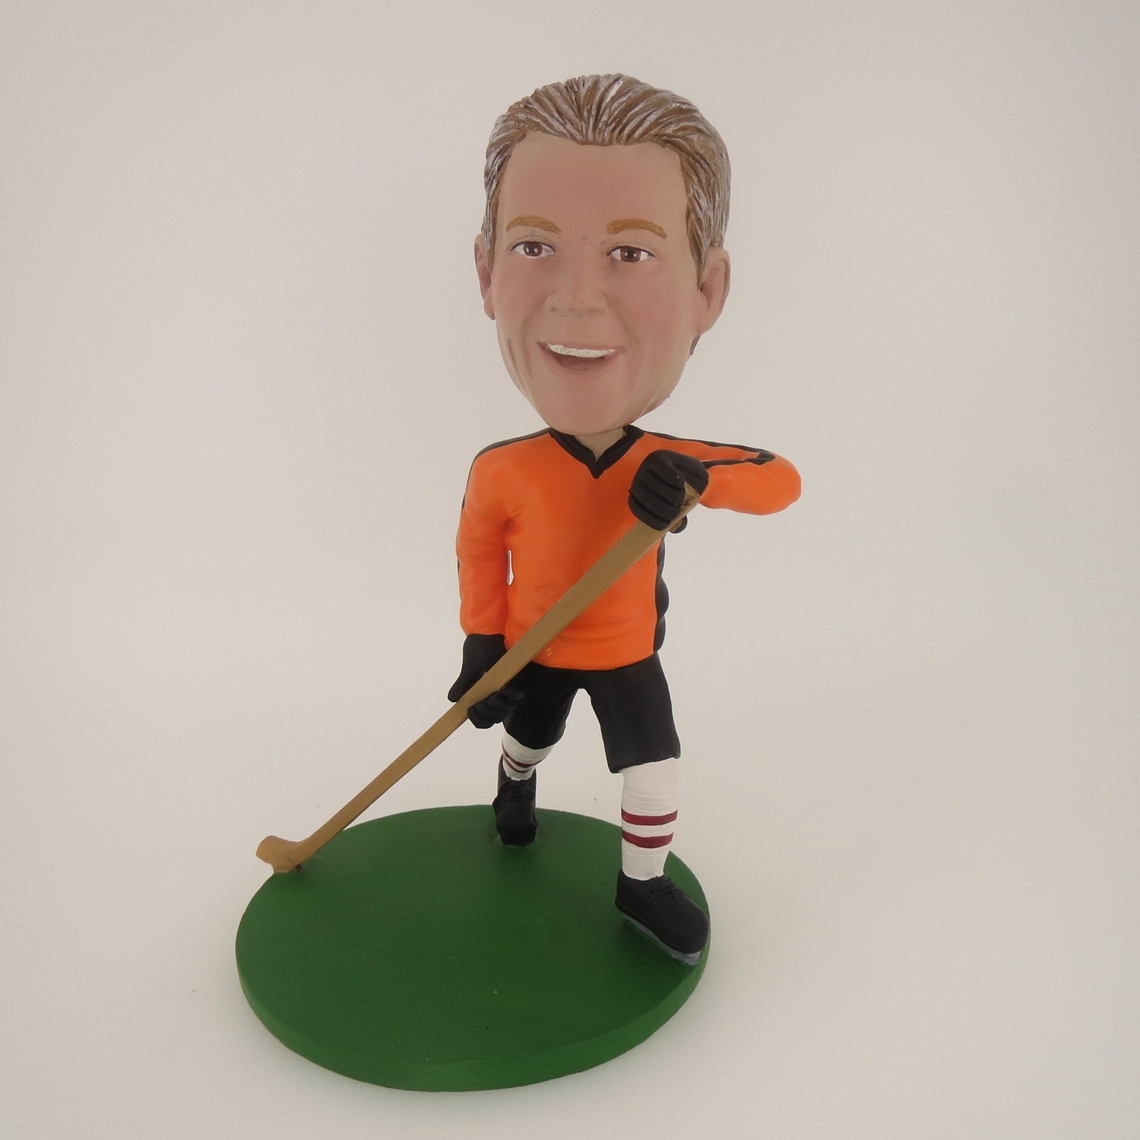 Picture of Custom Bobblehead Doll: Man With Hockey Stick